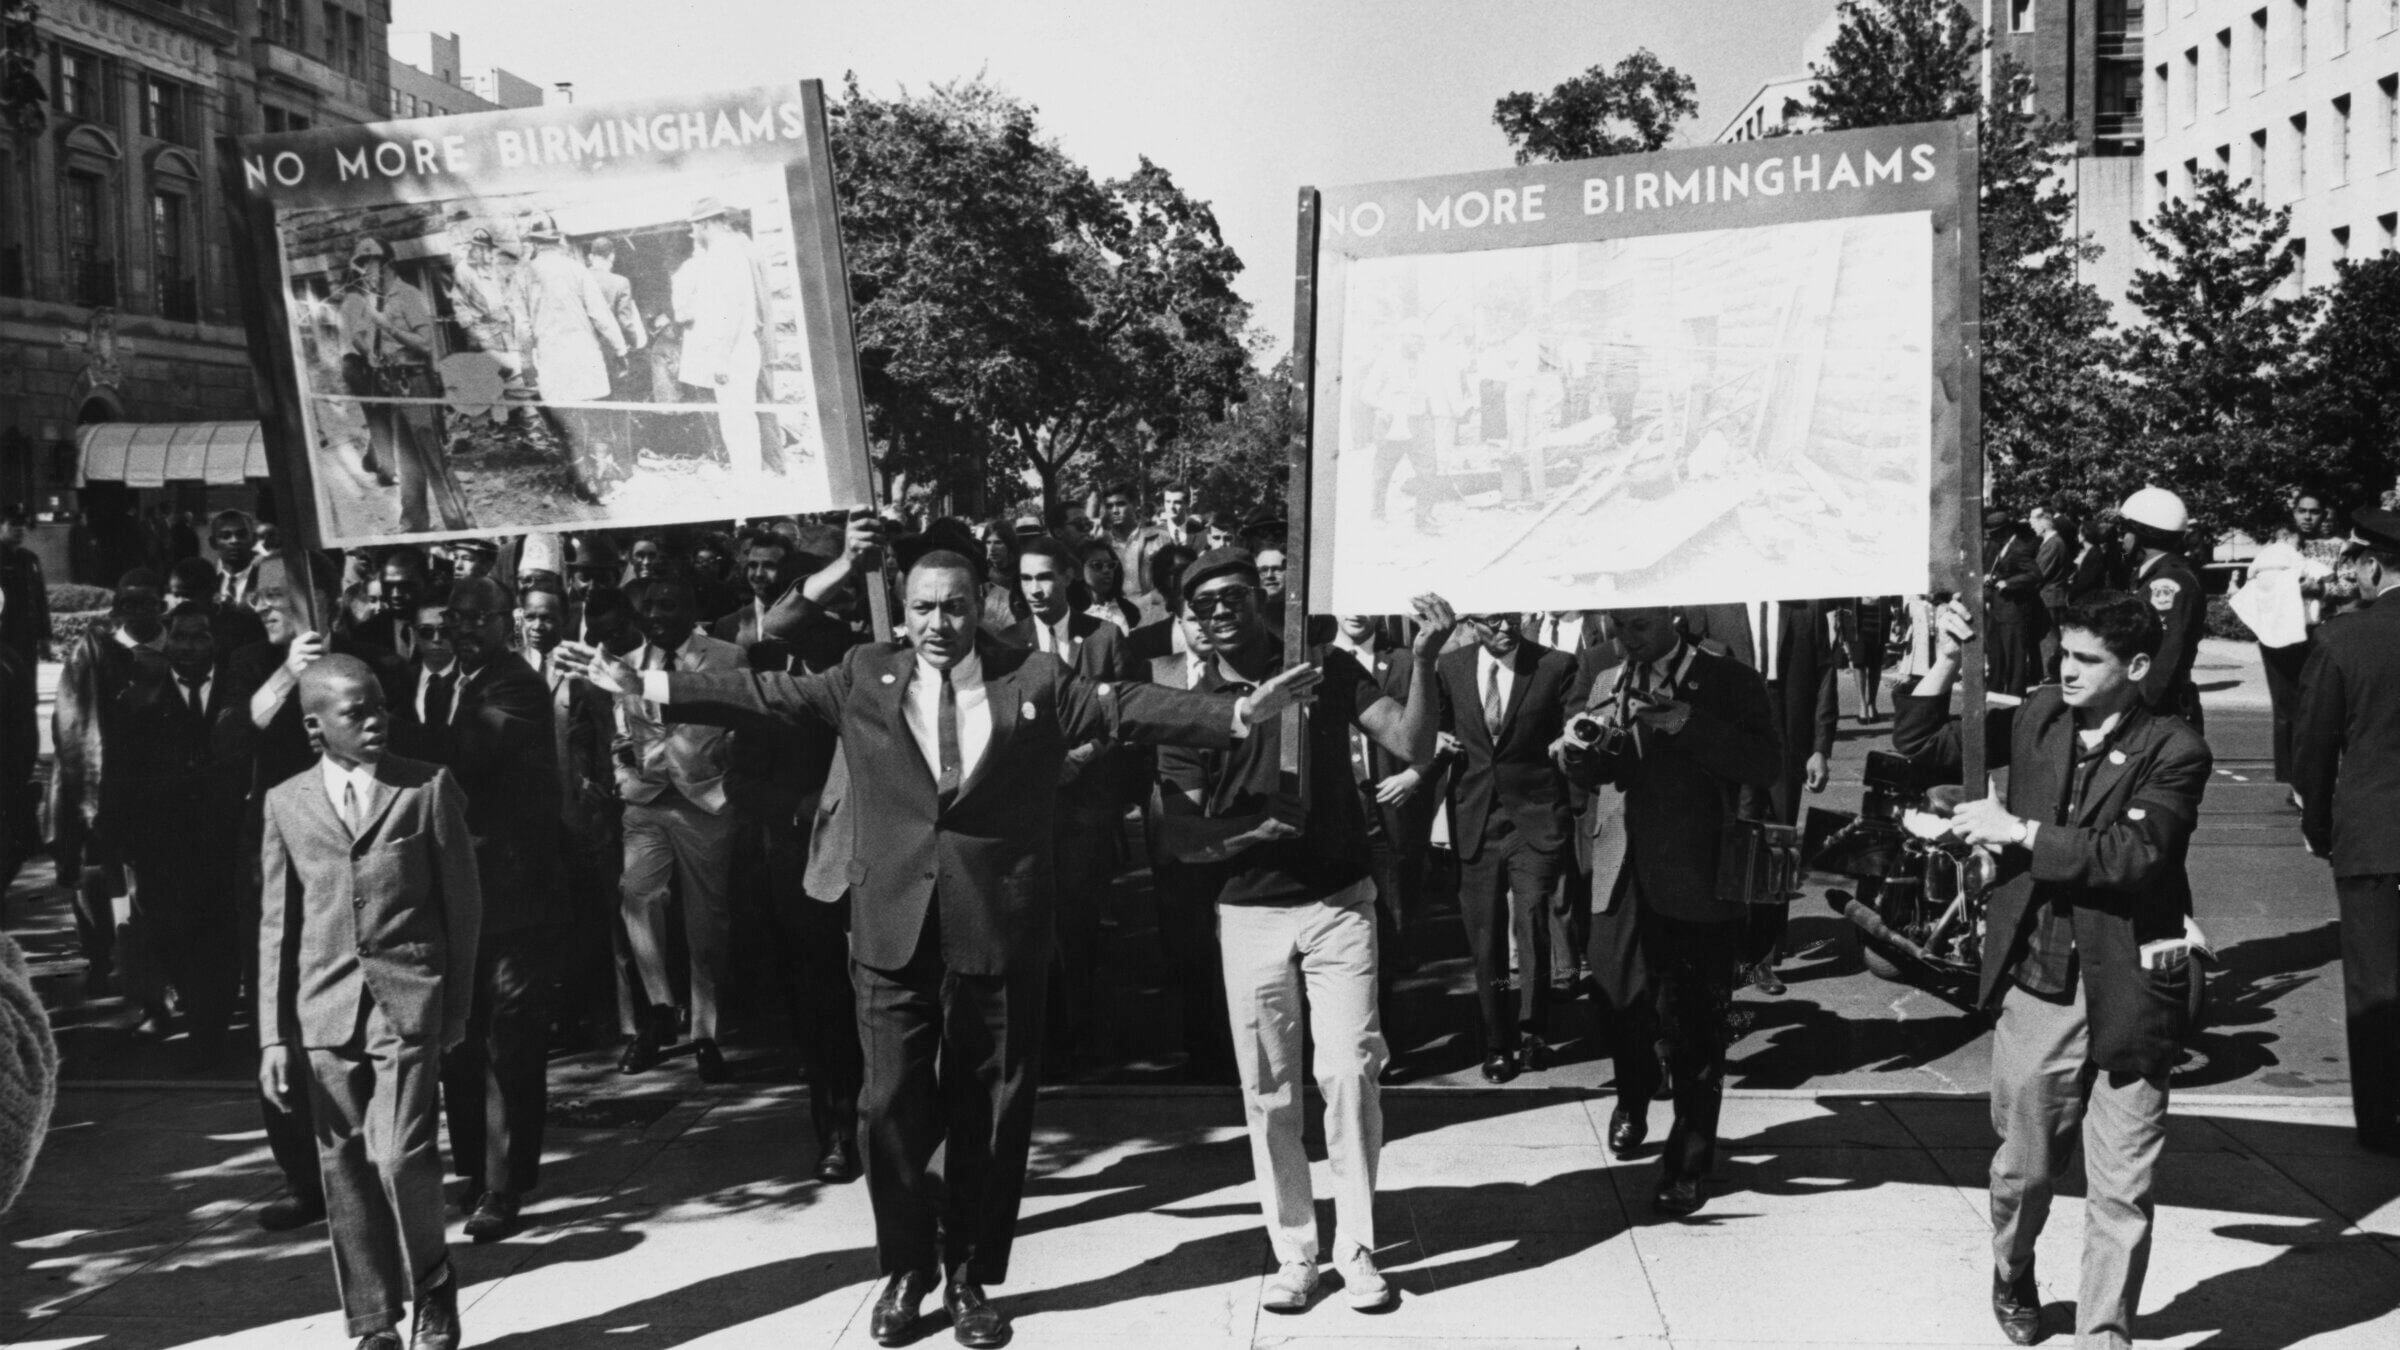 People at a civil rights demonstration holding posters reading 'No More Birminghams', in reference to the bombing of the 16th Street Baptist Church (in Birmingham, Alabama), Washington D.C., Sept. 22. 1963. The bombing had been carried out by white supremacists several days earlier, on Sept. 15.